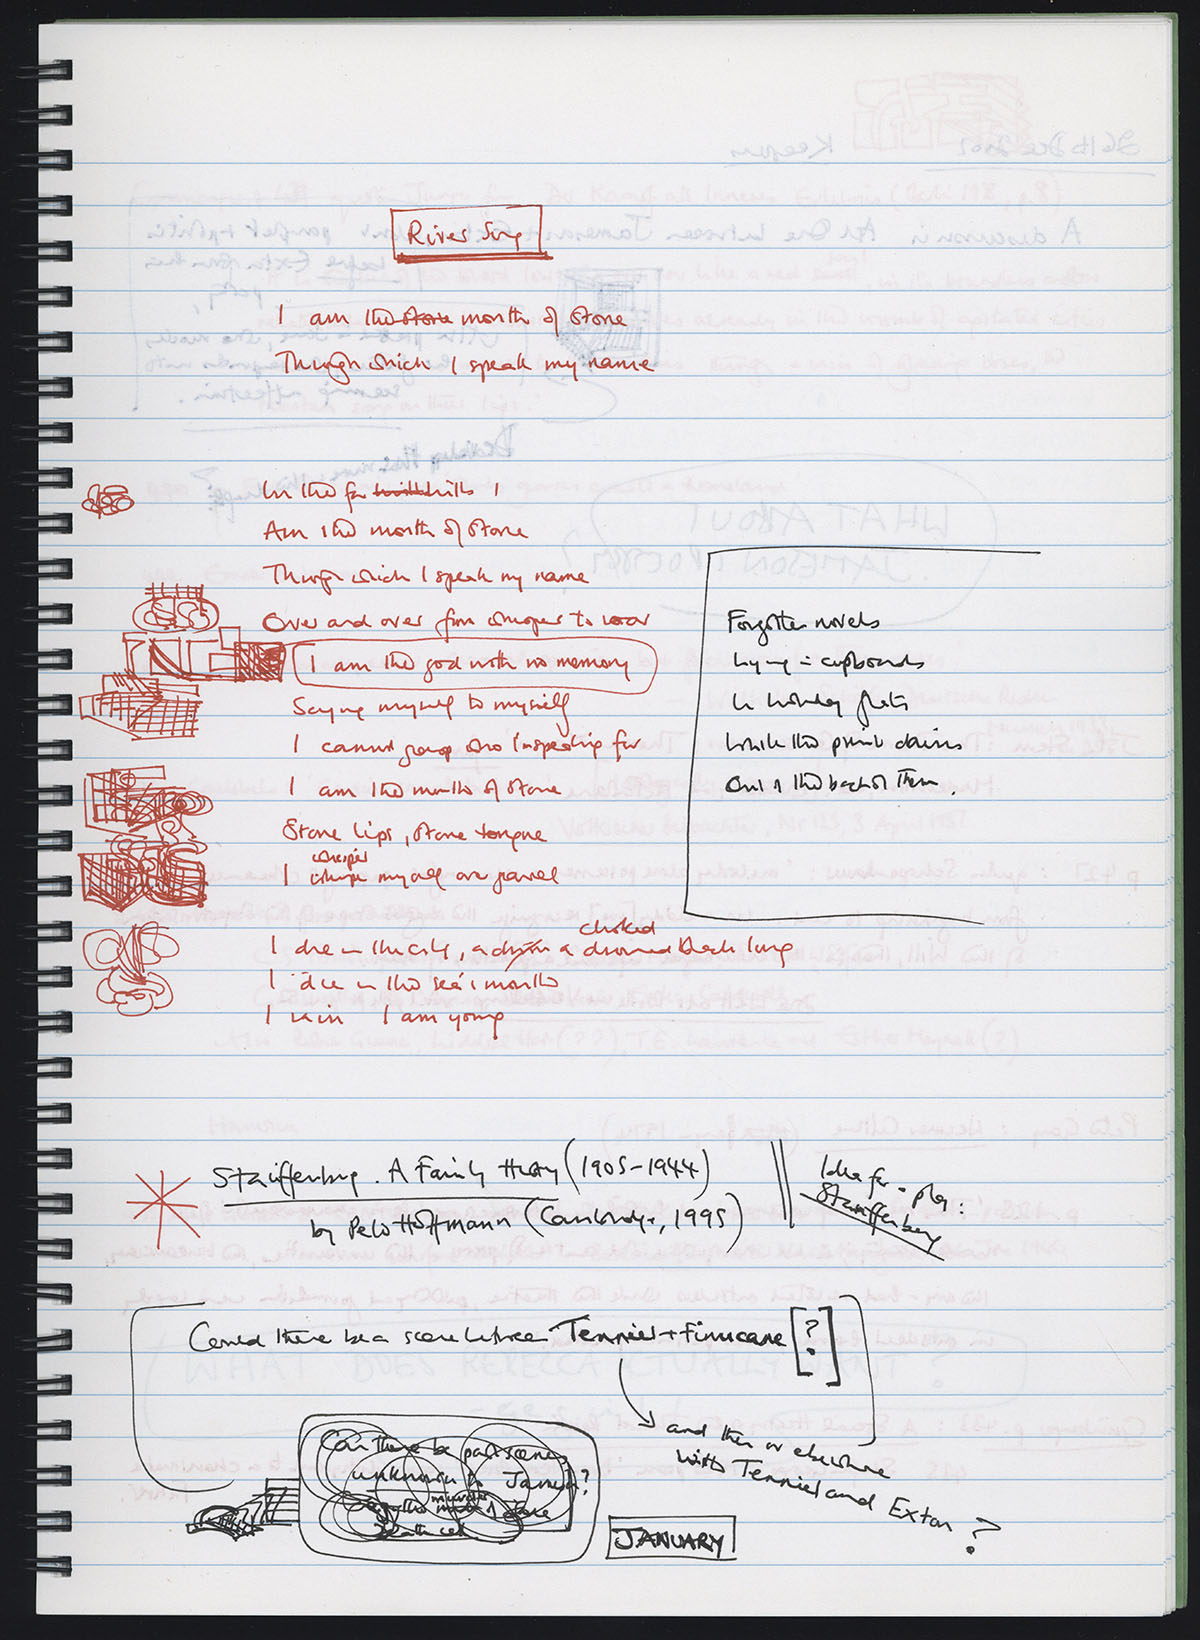 Scanned page from a book - listen to audio below for transcript